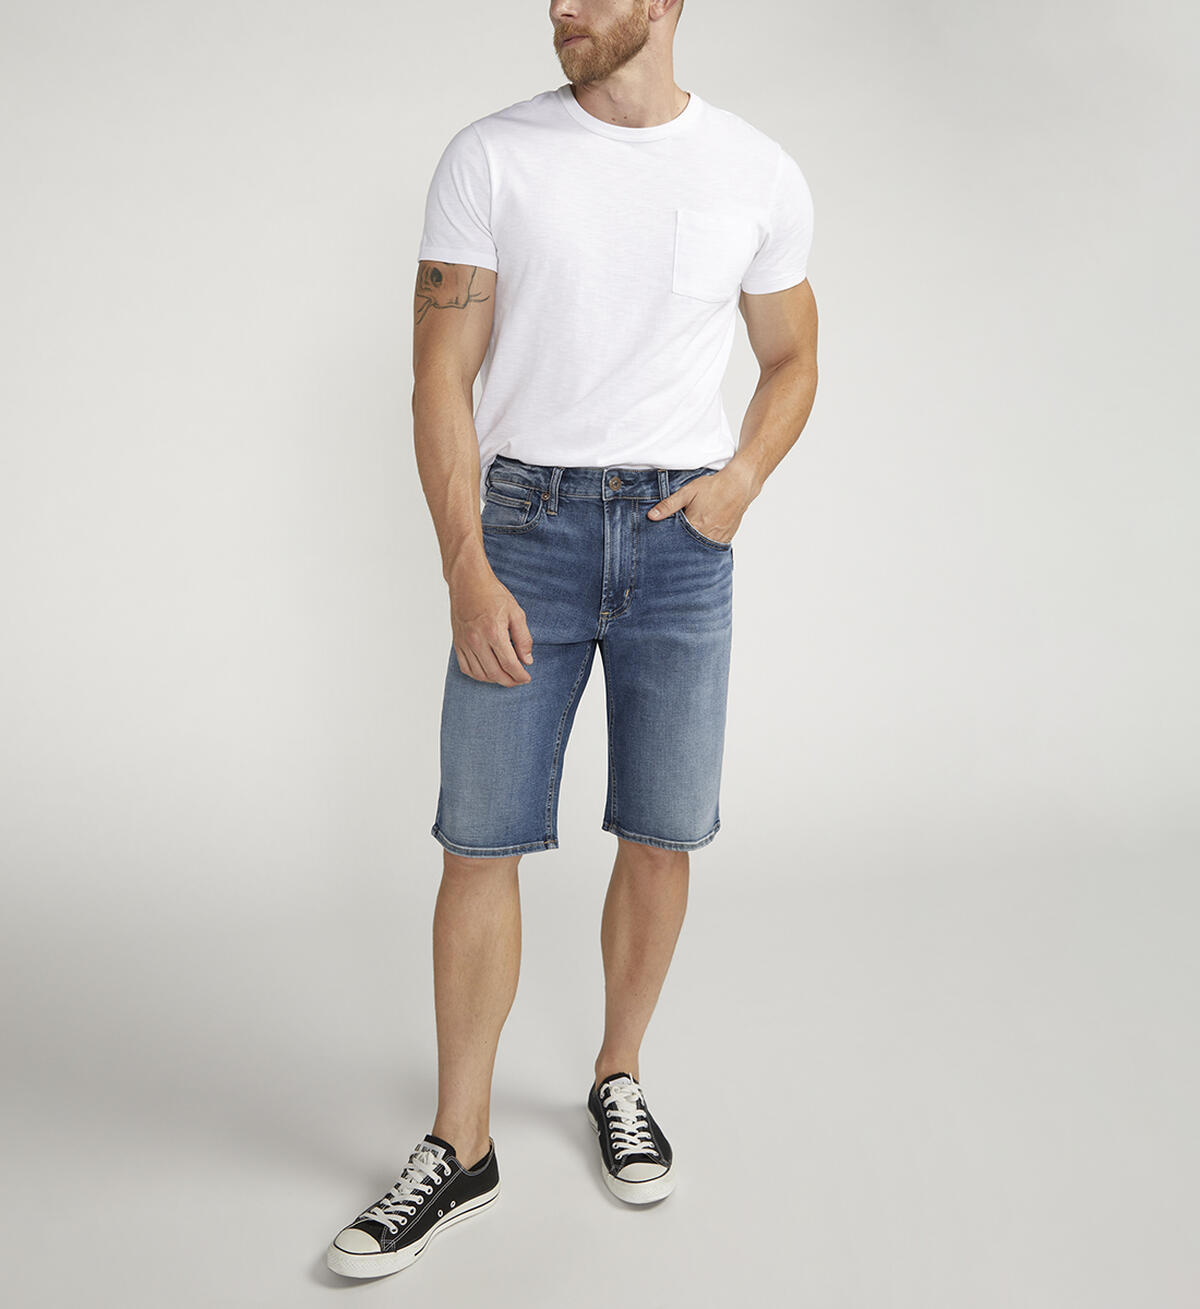 Grayson Relaxed Fit Shorts, , hi-res image number 0